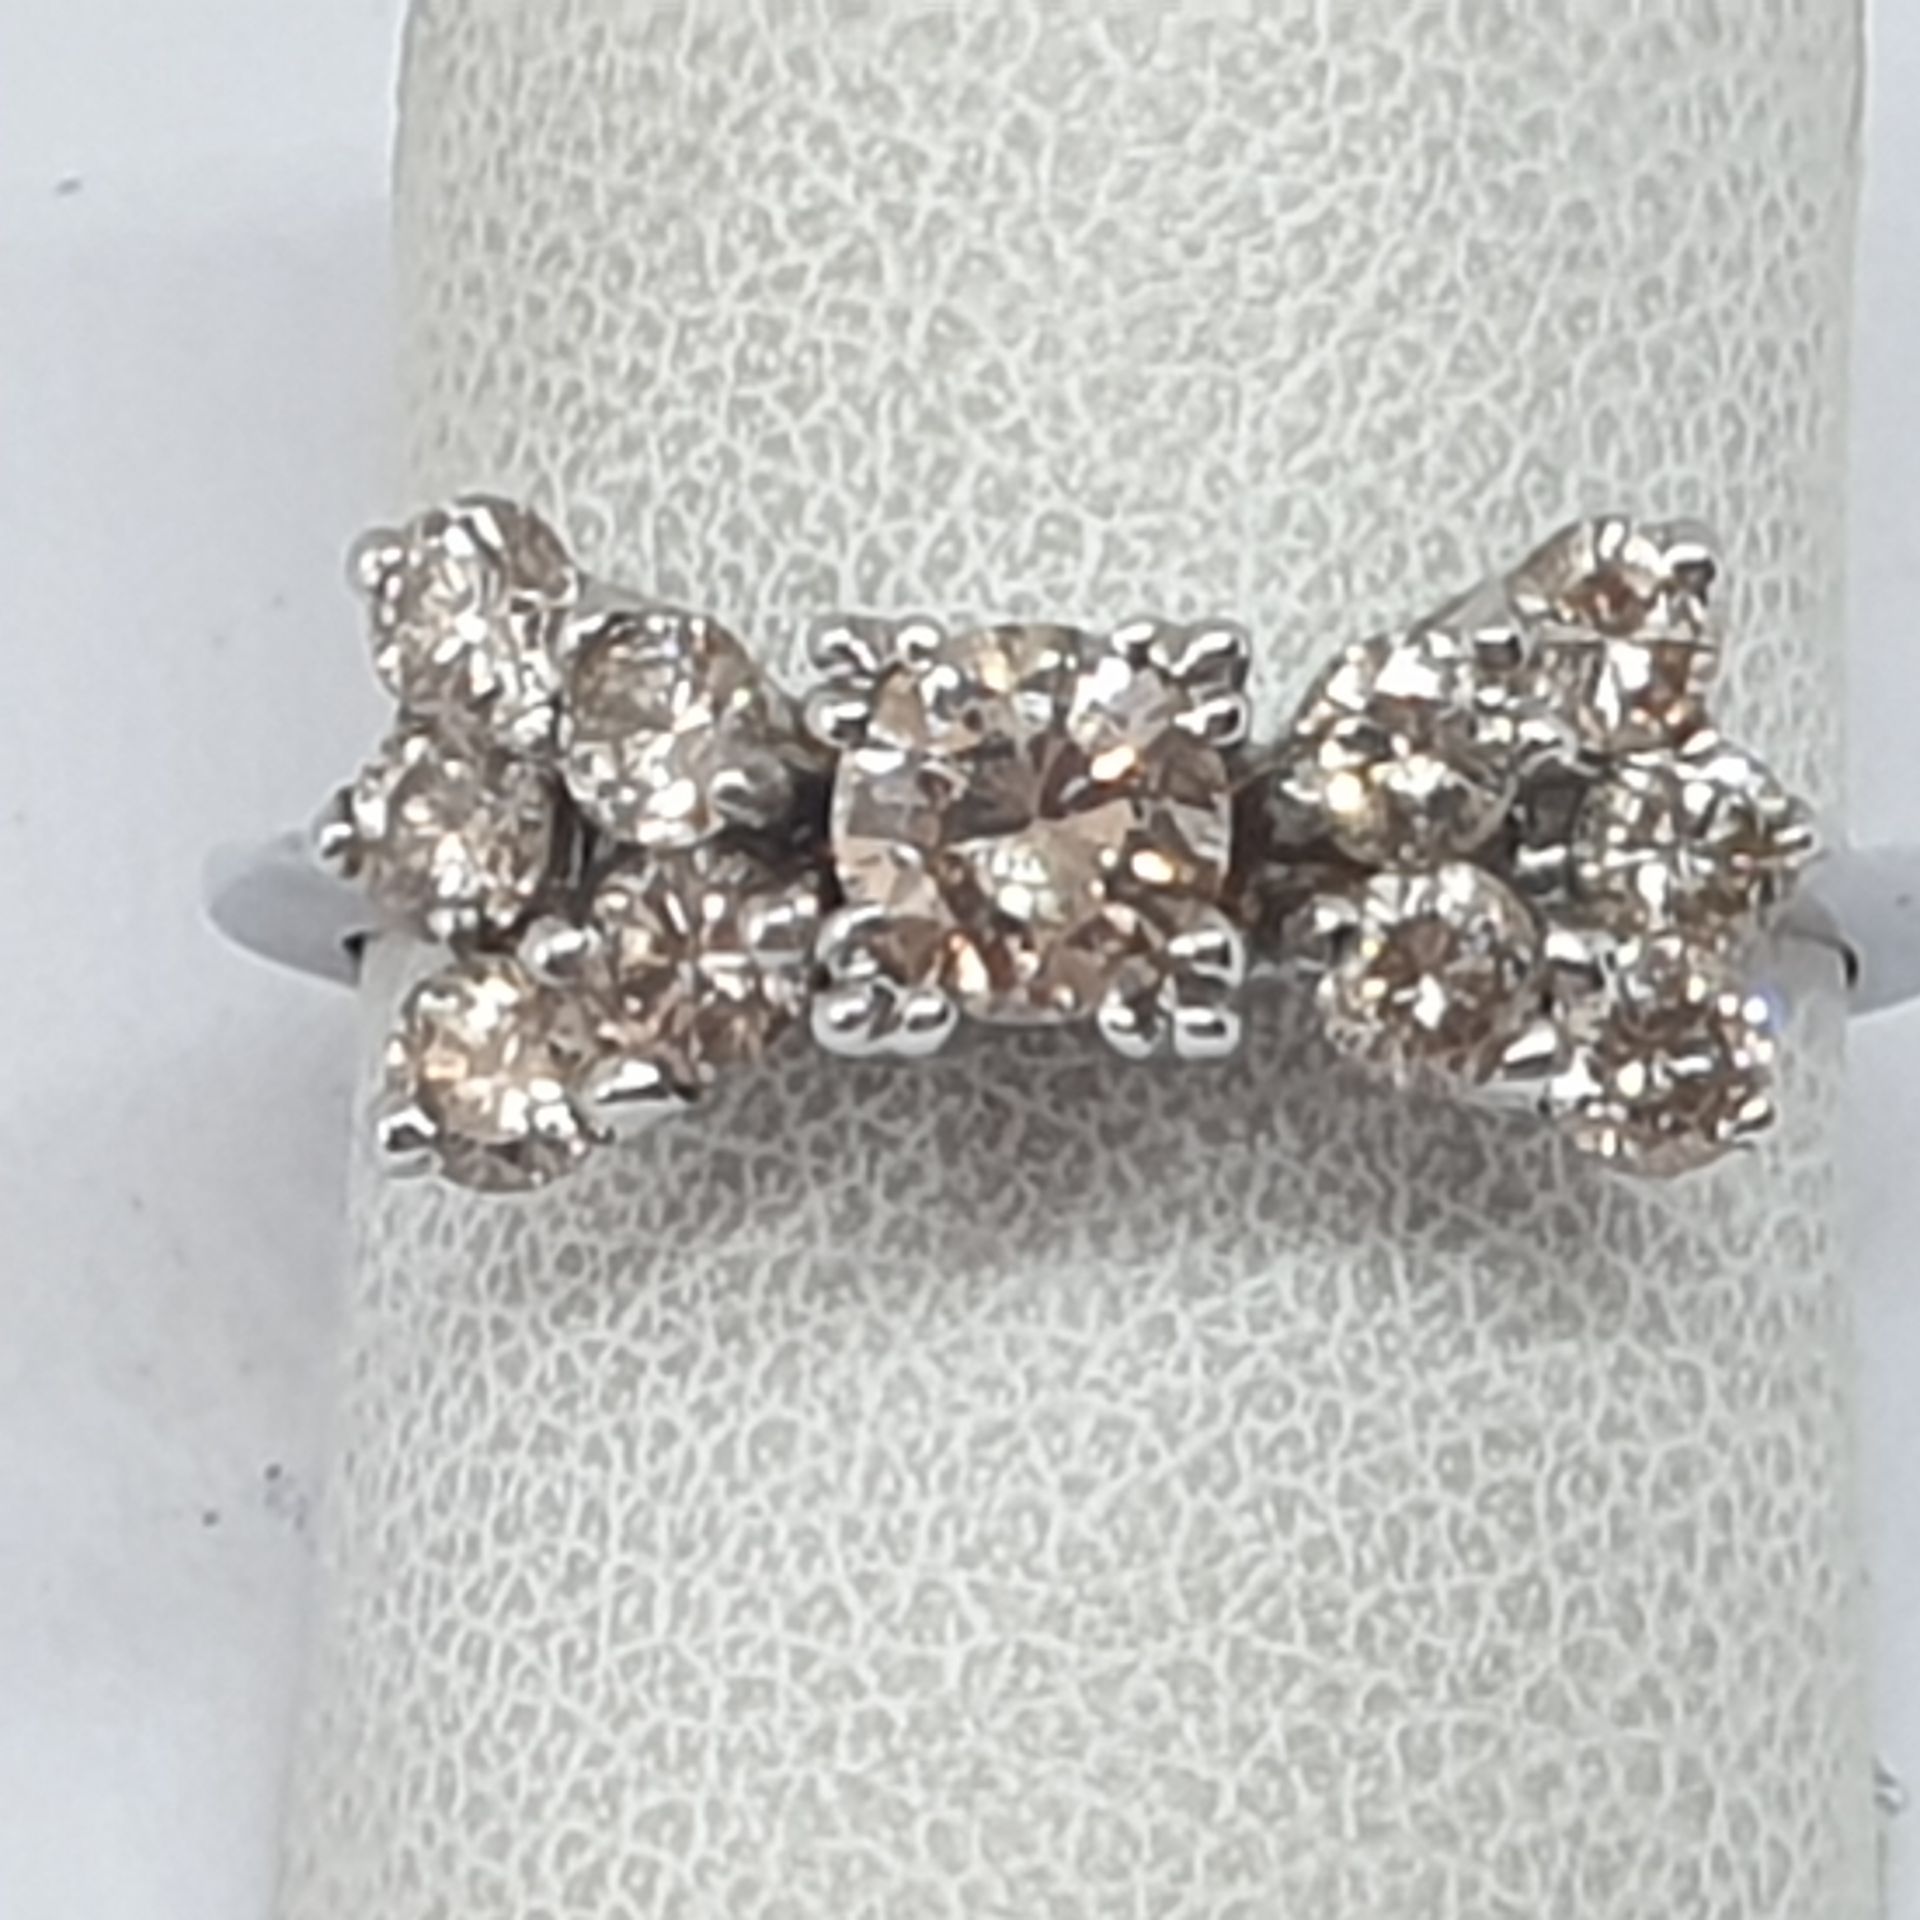 18 KT GOLD RING, 4.3 GRAMS WITH CENTRAL DIAMOND 0.40 CT AND LATERAL DIAMONDS COLOR CHAMPAGNE 0.70 CT - Image 4 of 4